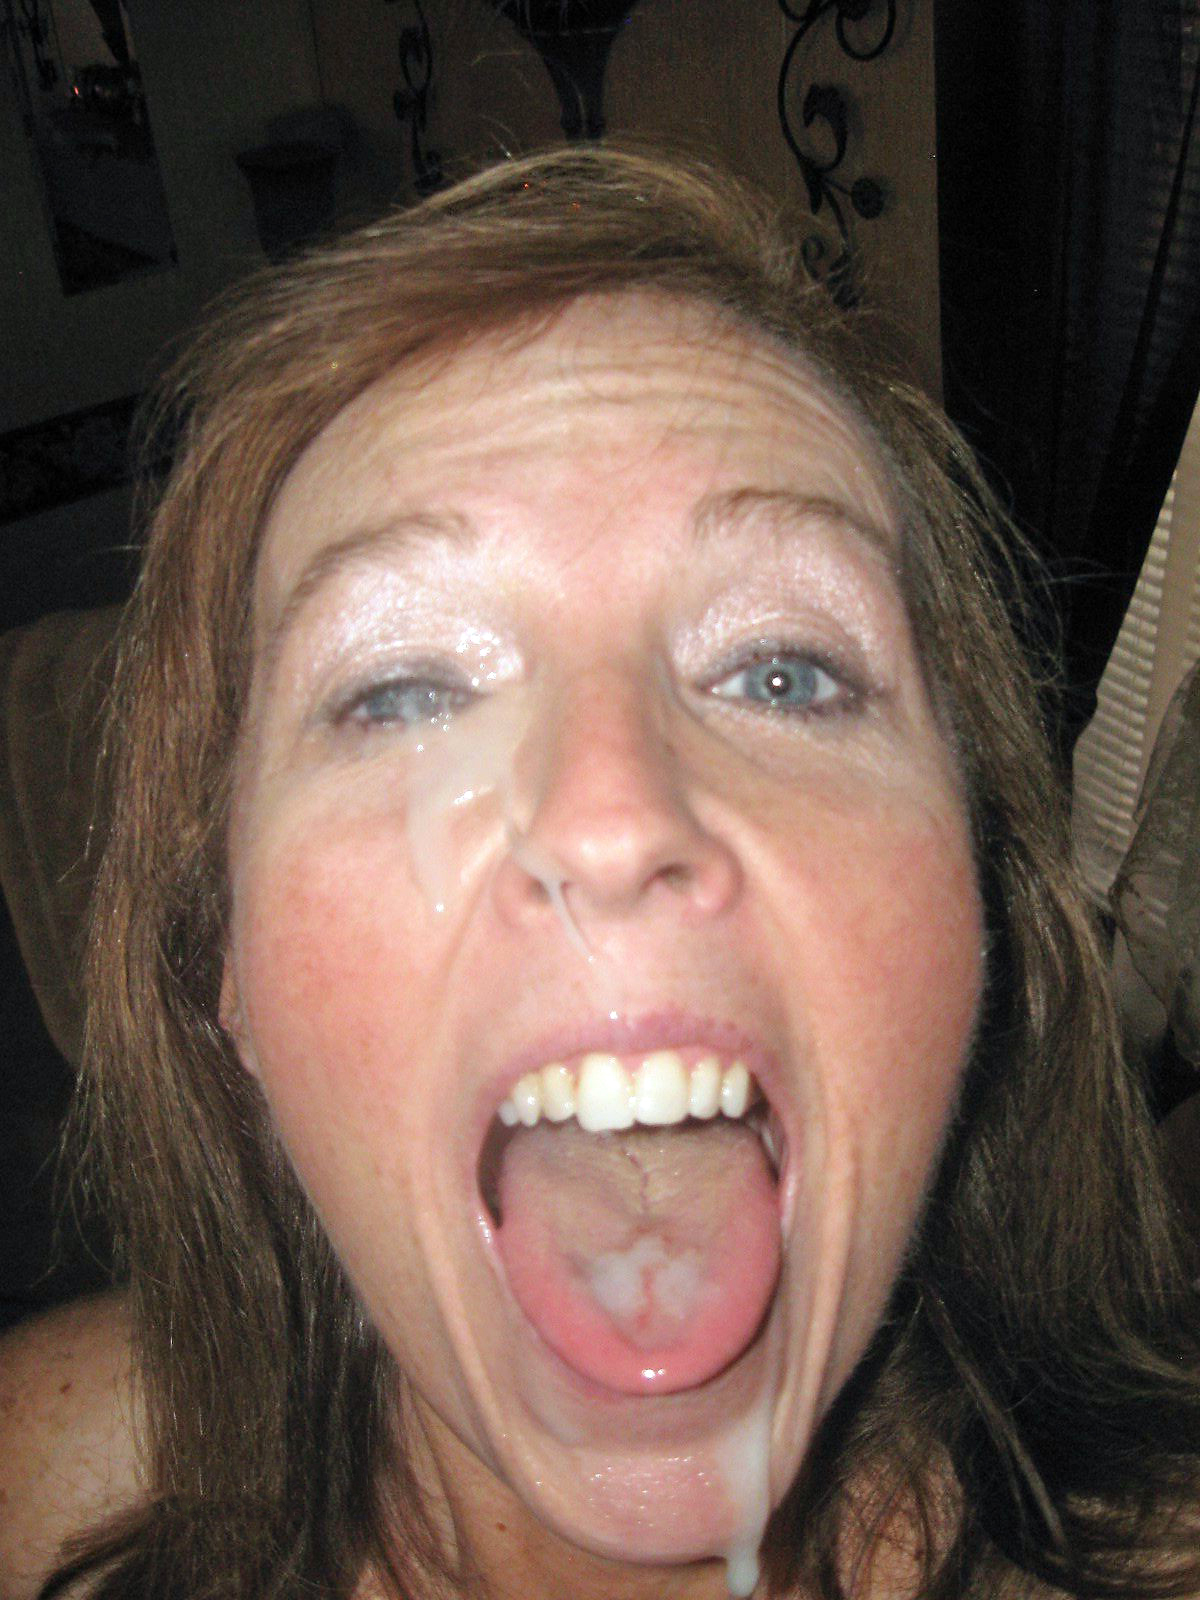 Tongue Out Facial Porn - Gorgeous adult wed facial porn pictures - MatureHomemadePorn.com